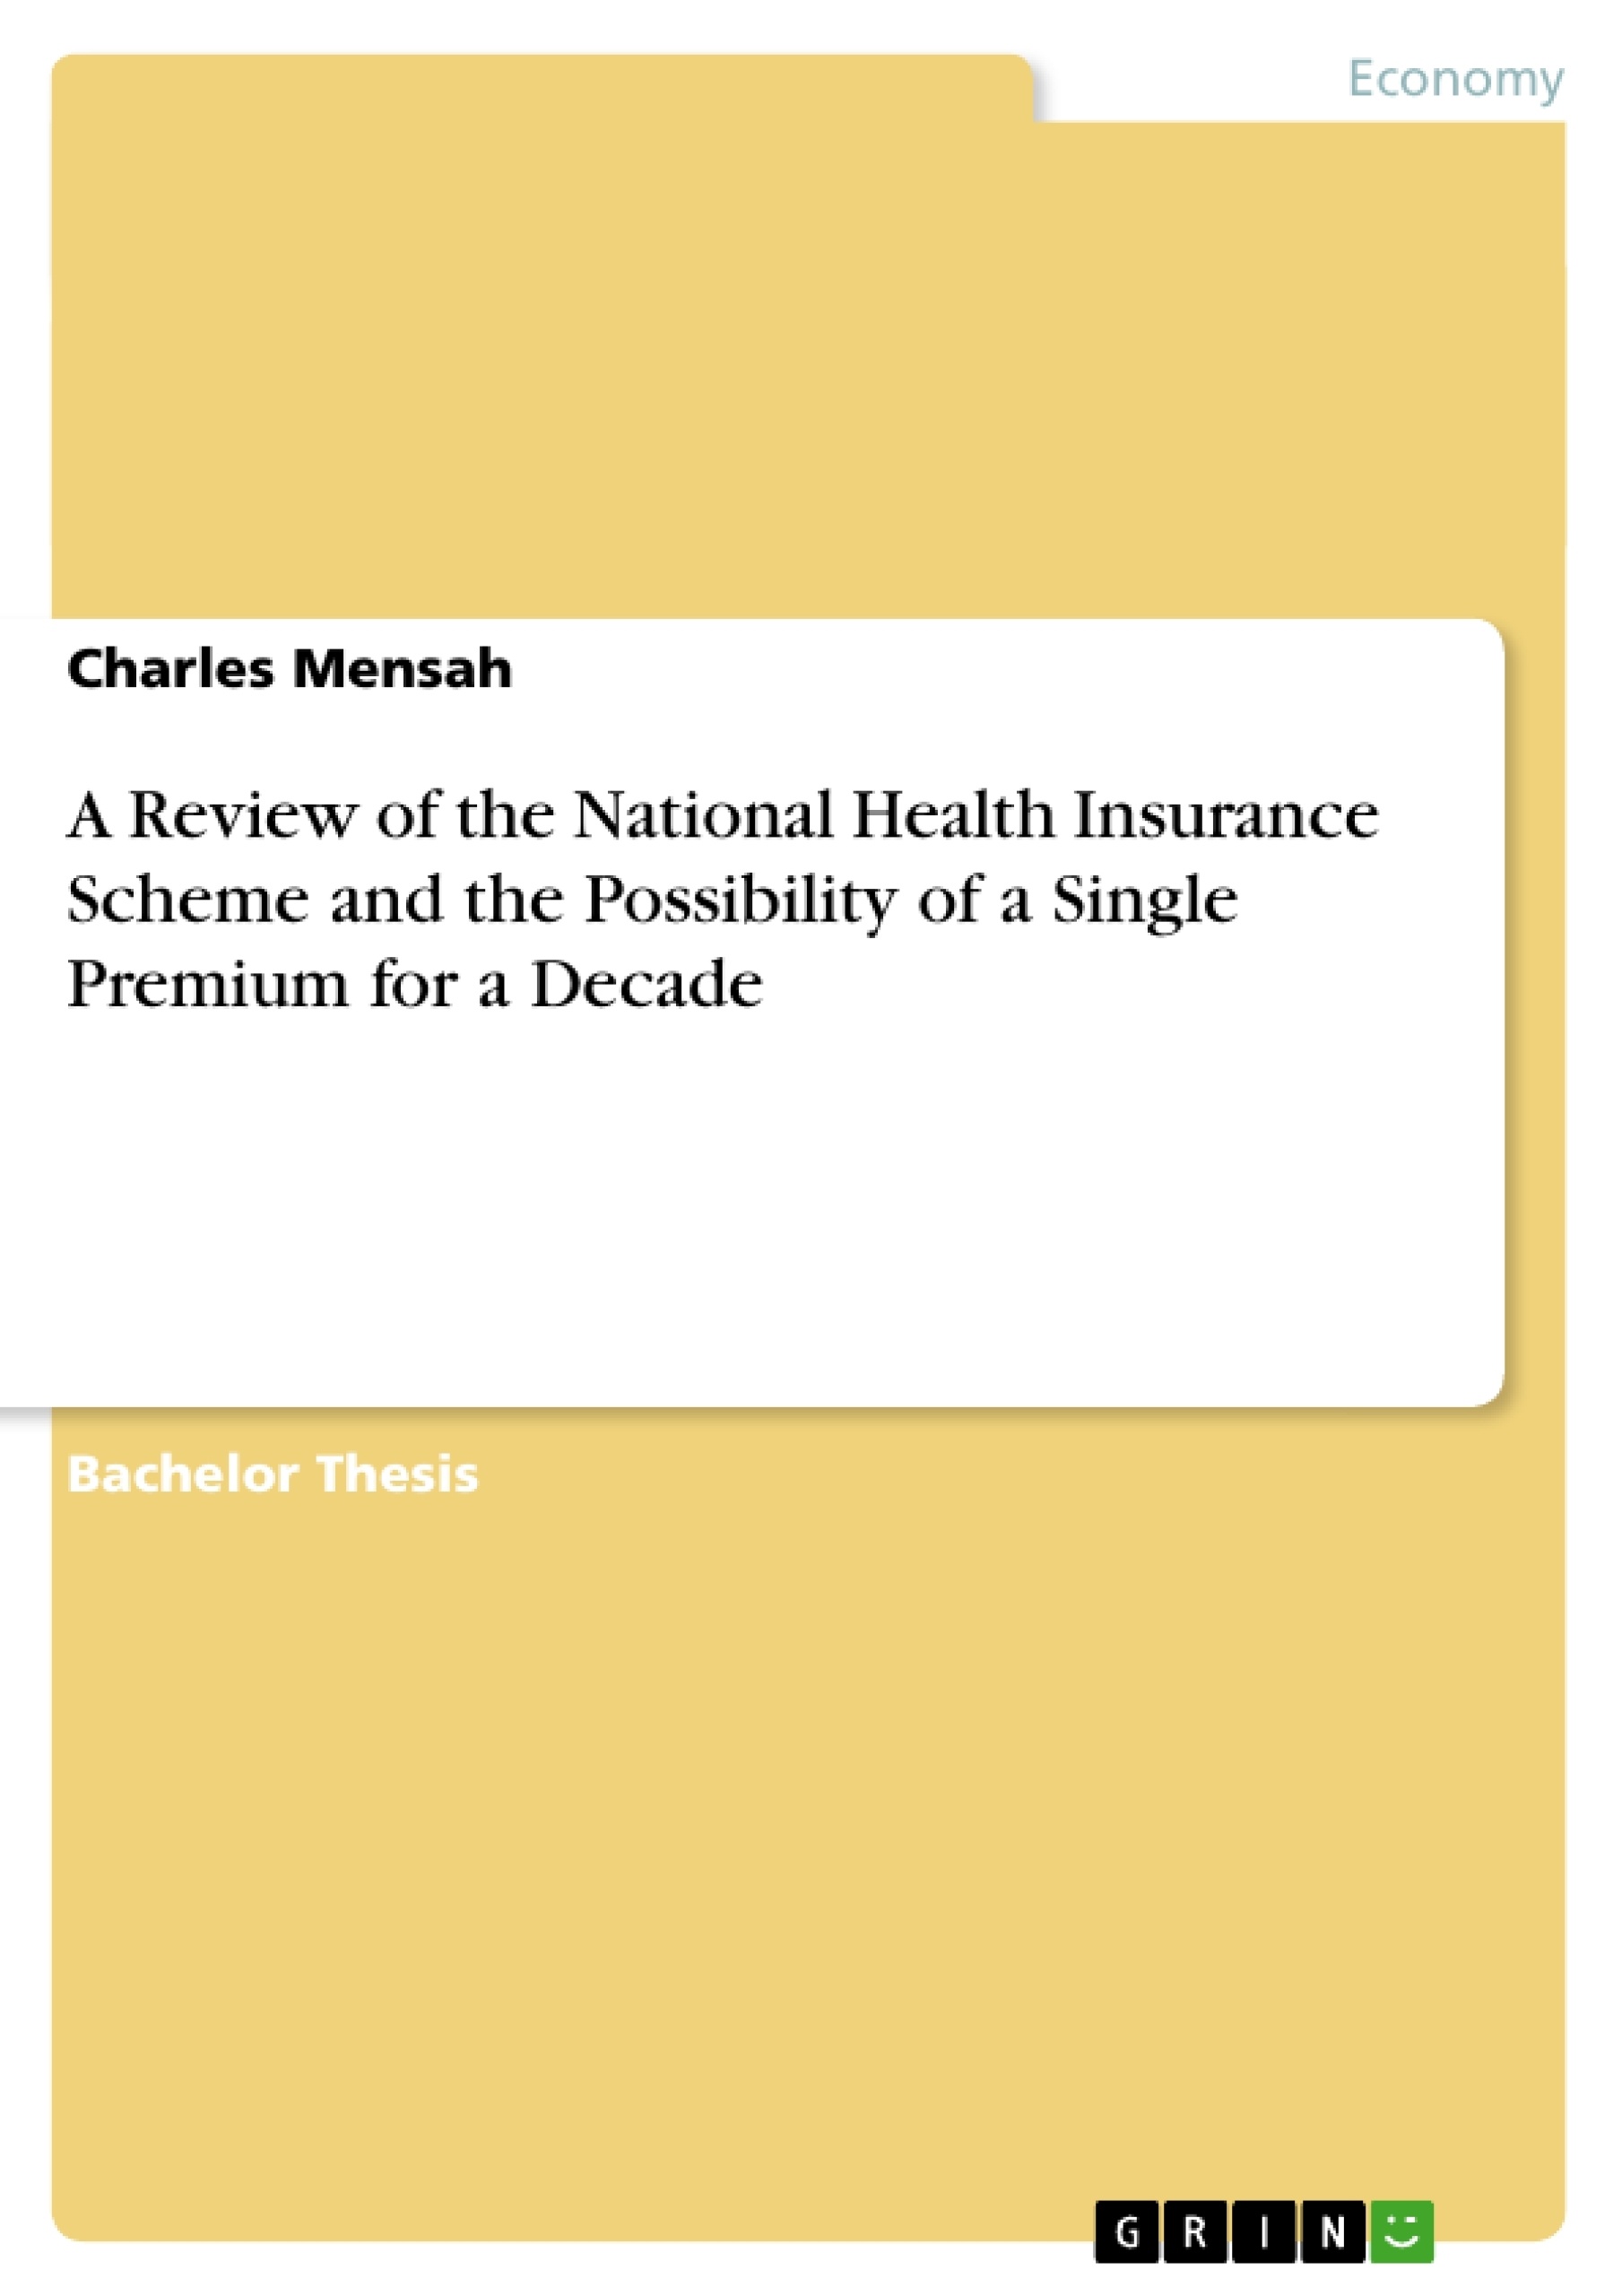 Titre: A Review of the National Health Insurance Scheme and the Possibility of a Single Premium for a Decade